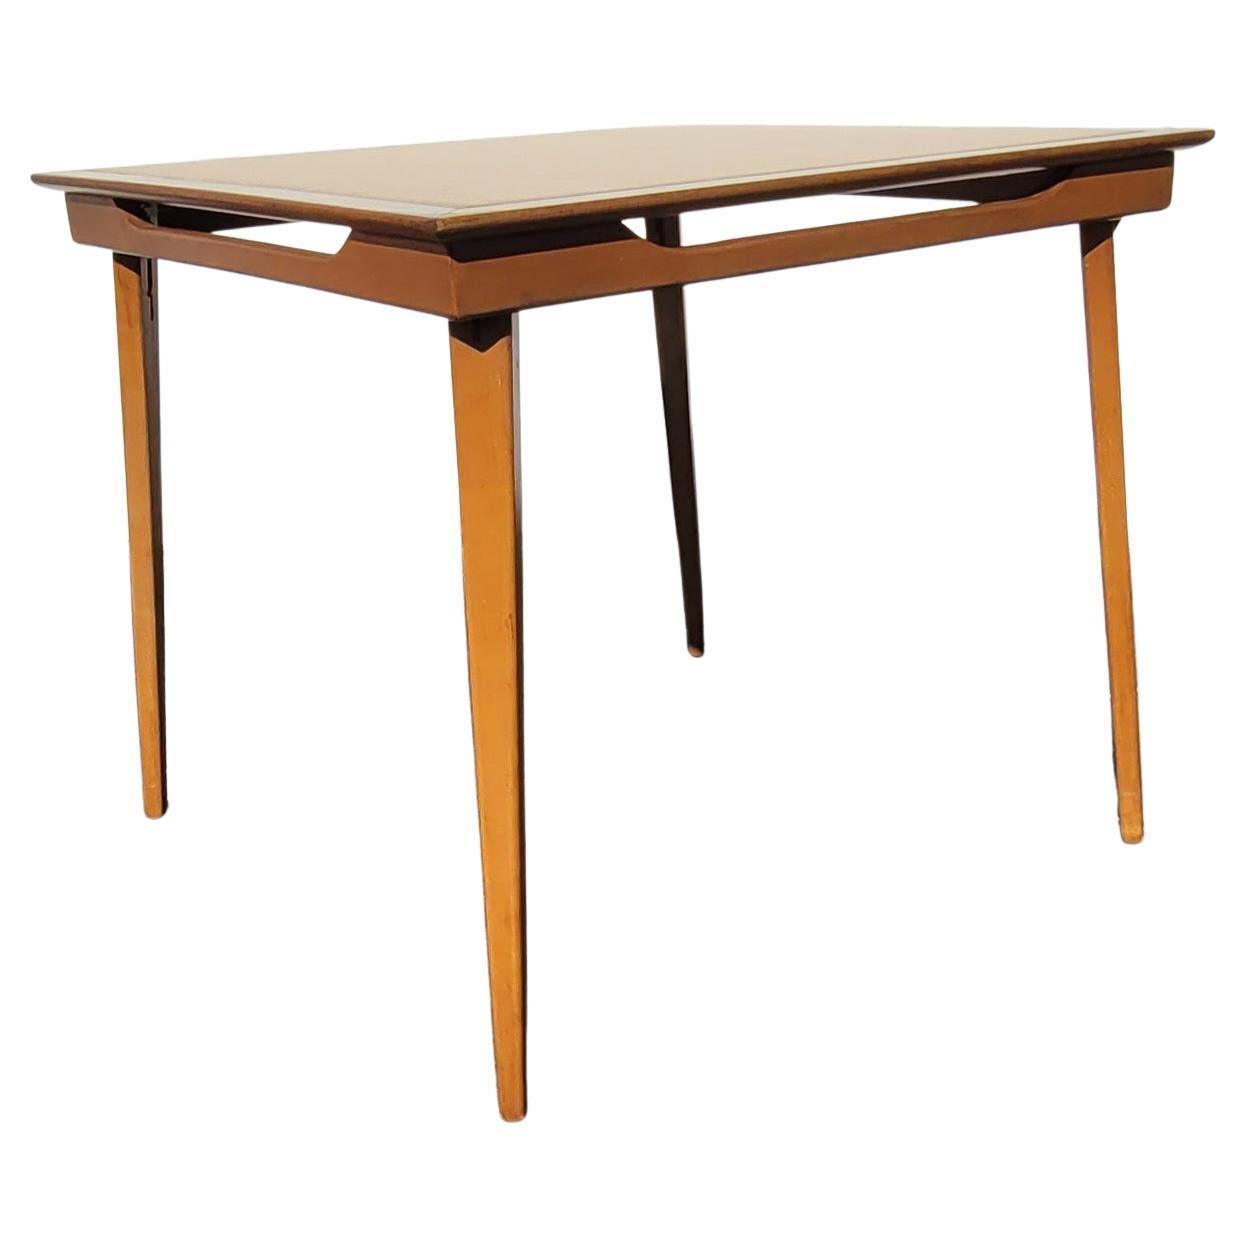 A 1970s solid maple with Leatherette top folding card table. 
Tan maple finish with almond color Leatherette top. 
Folding mechanism functions perfectly. 
Measures 32.5:W x 32.5